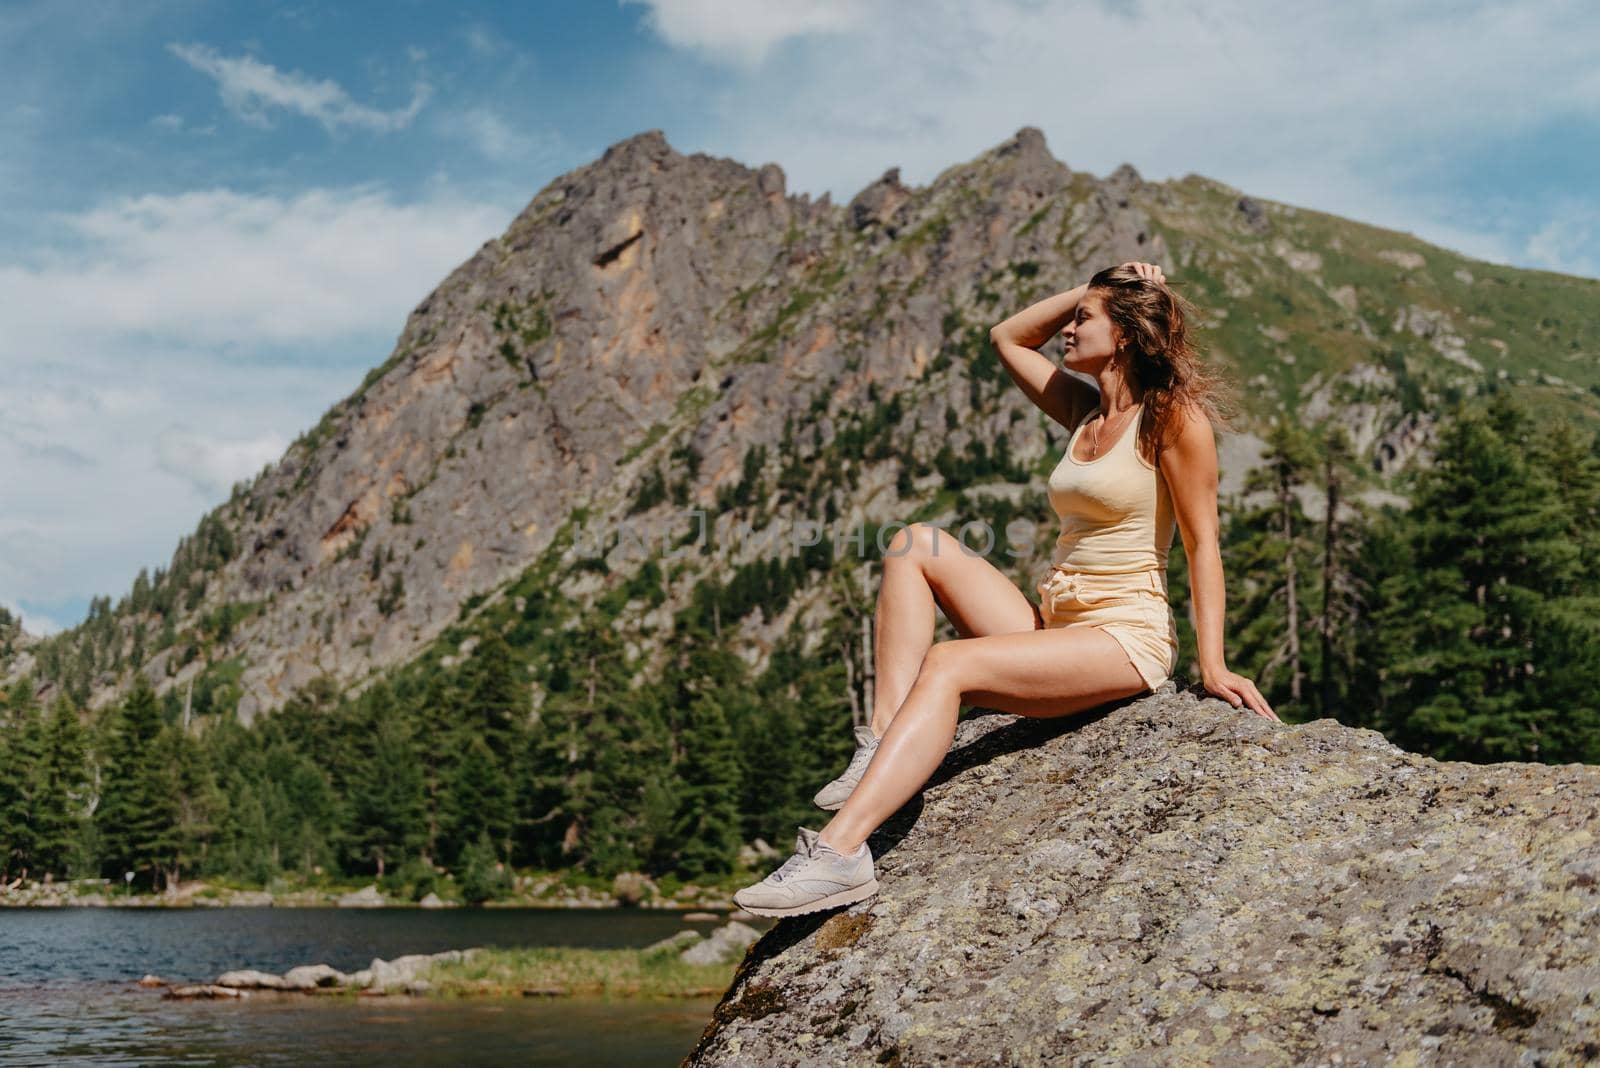 Tourist girl enjoys the magical view of the lake, coniferous forest and magical view sitting on big stone on the shore of a turquoise lake in the mountains. Hiking in the Natural Park. Black lake.